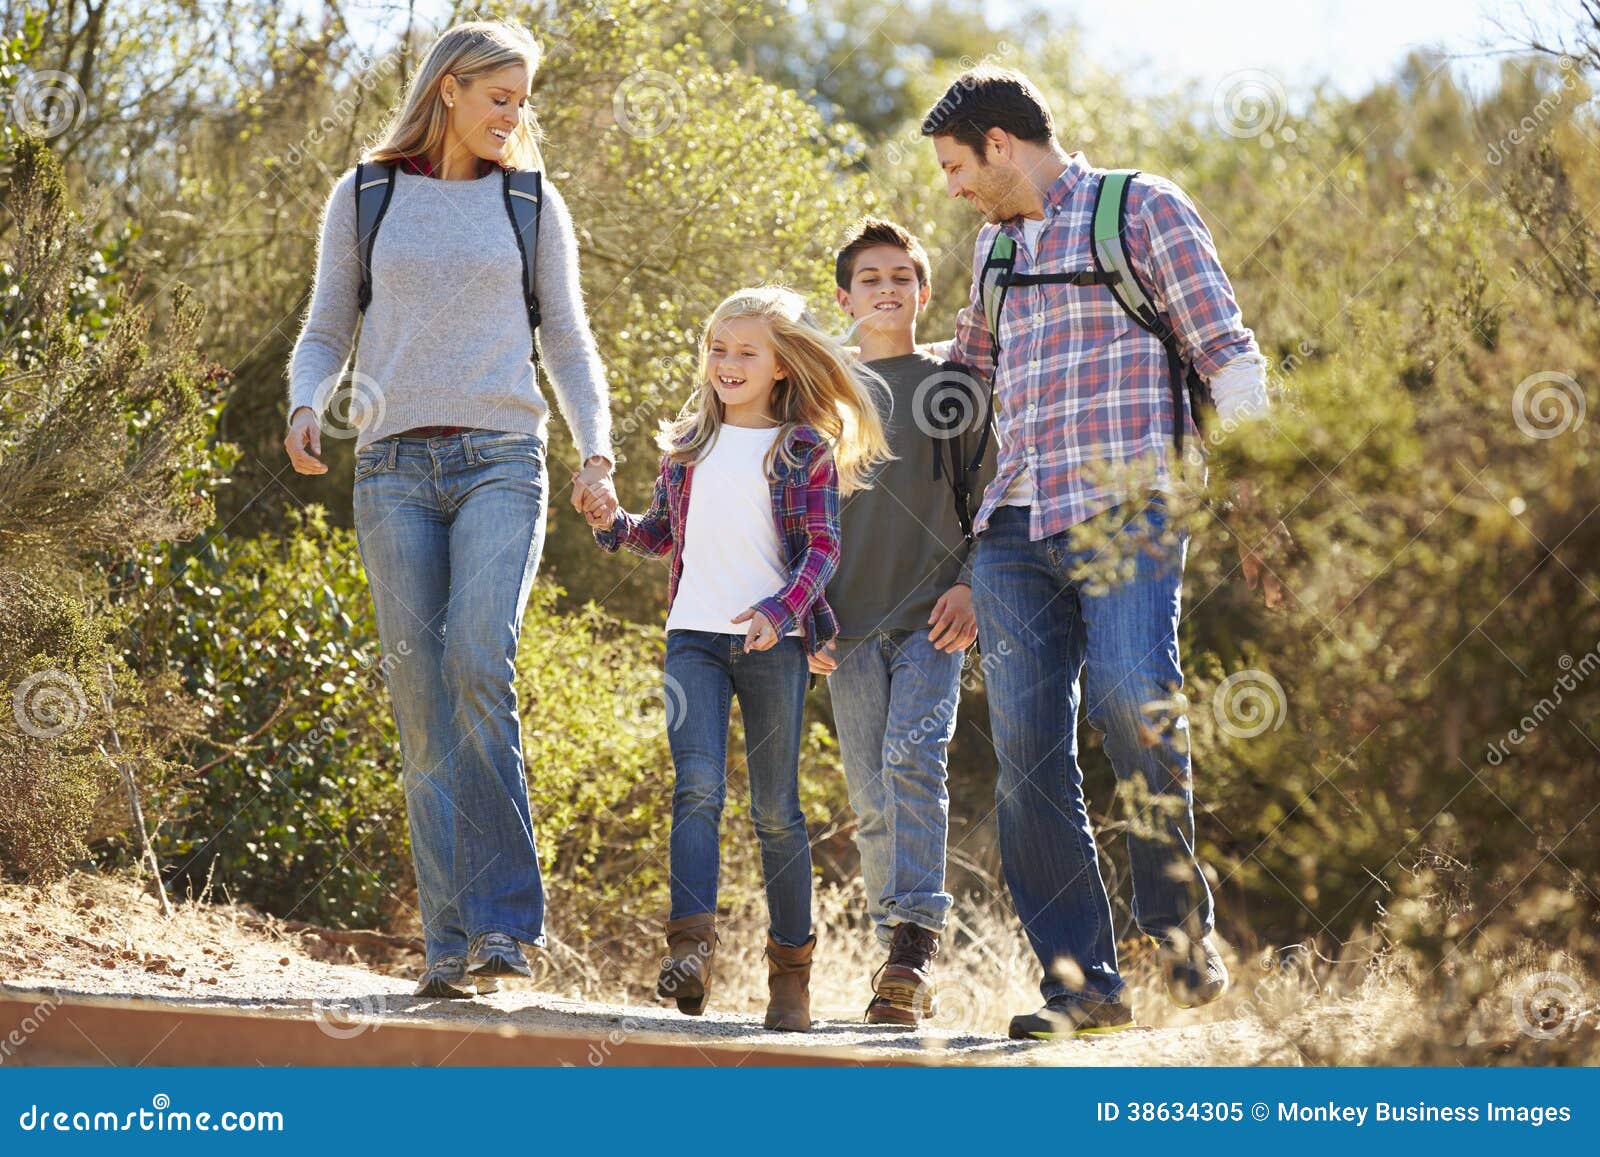 family hiking in countryside wearing backpacks